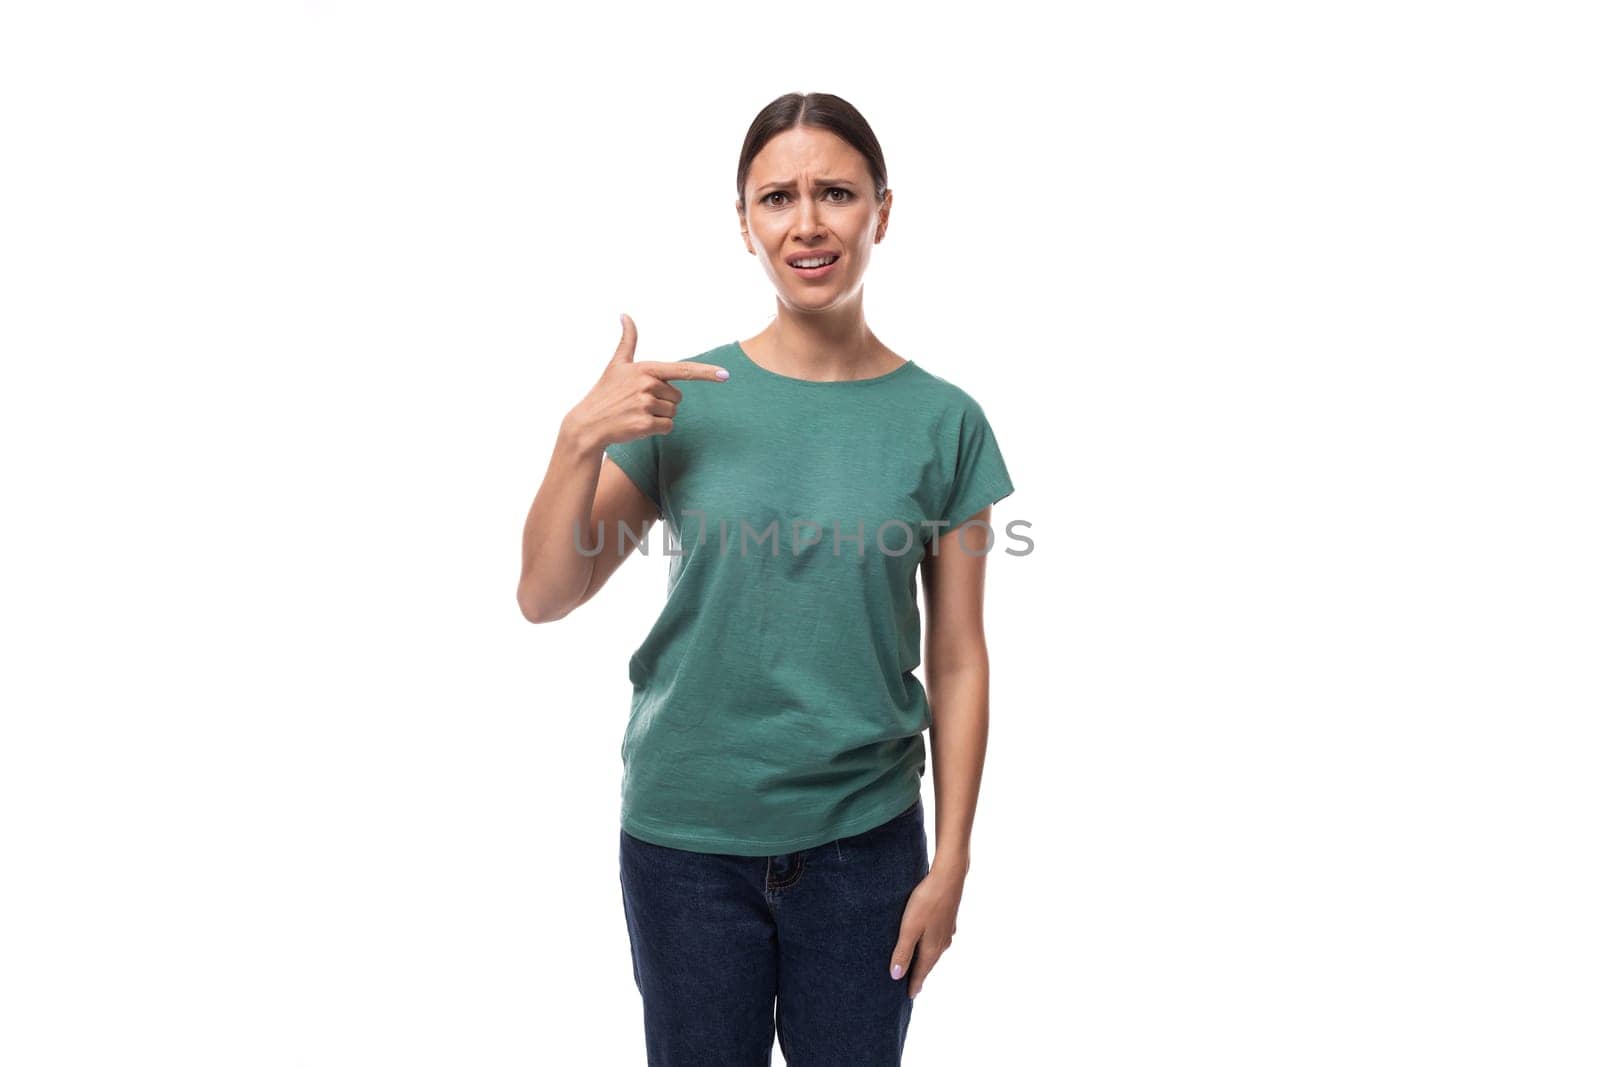 well-groomed young brunette woman dressed in a green t-shirt and jeans looks friendly.